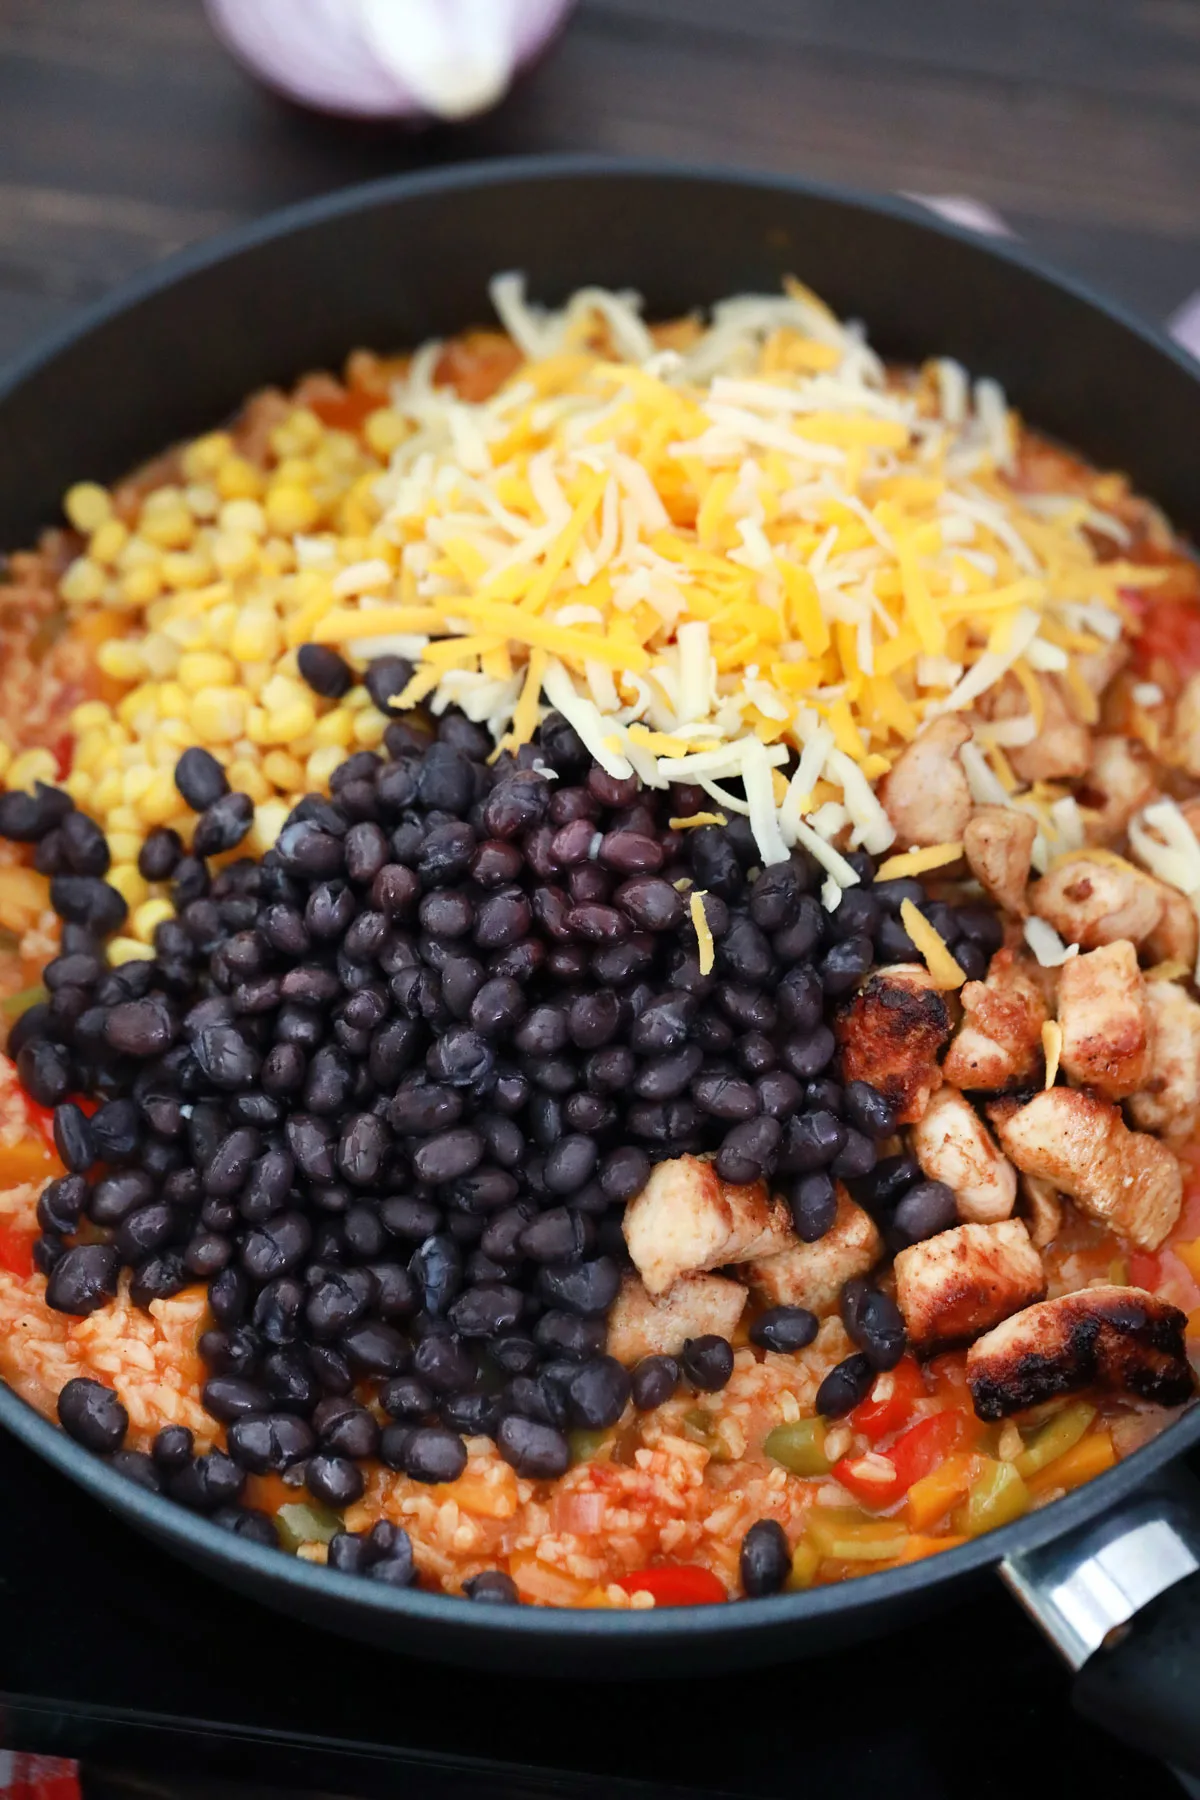 Adding beans, cheese and chicken to skillet mixture.